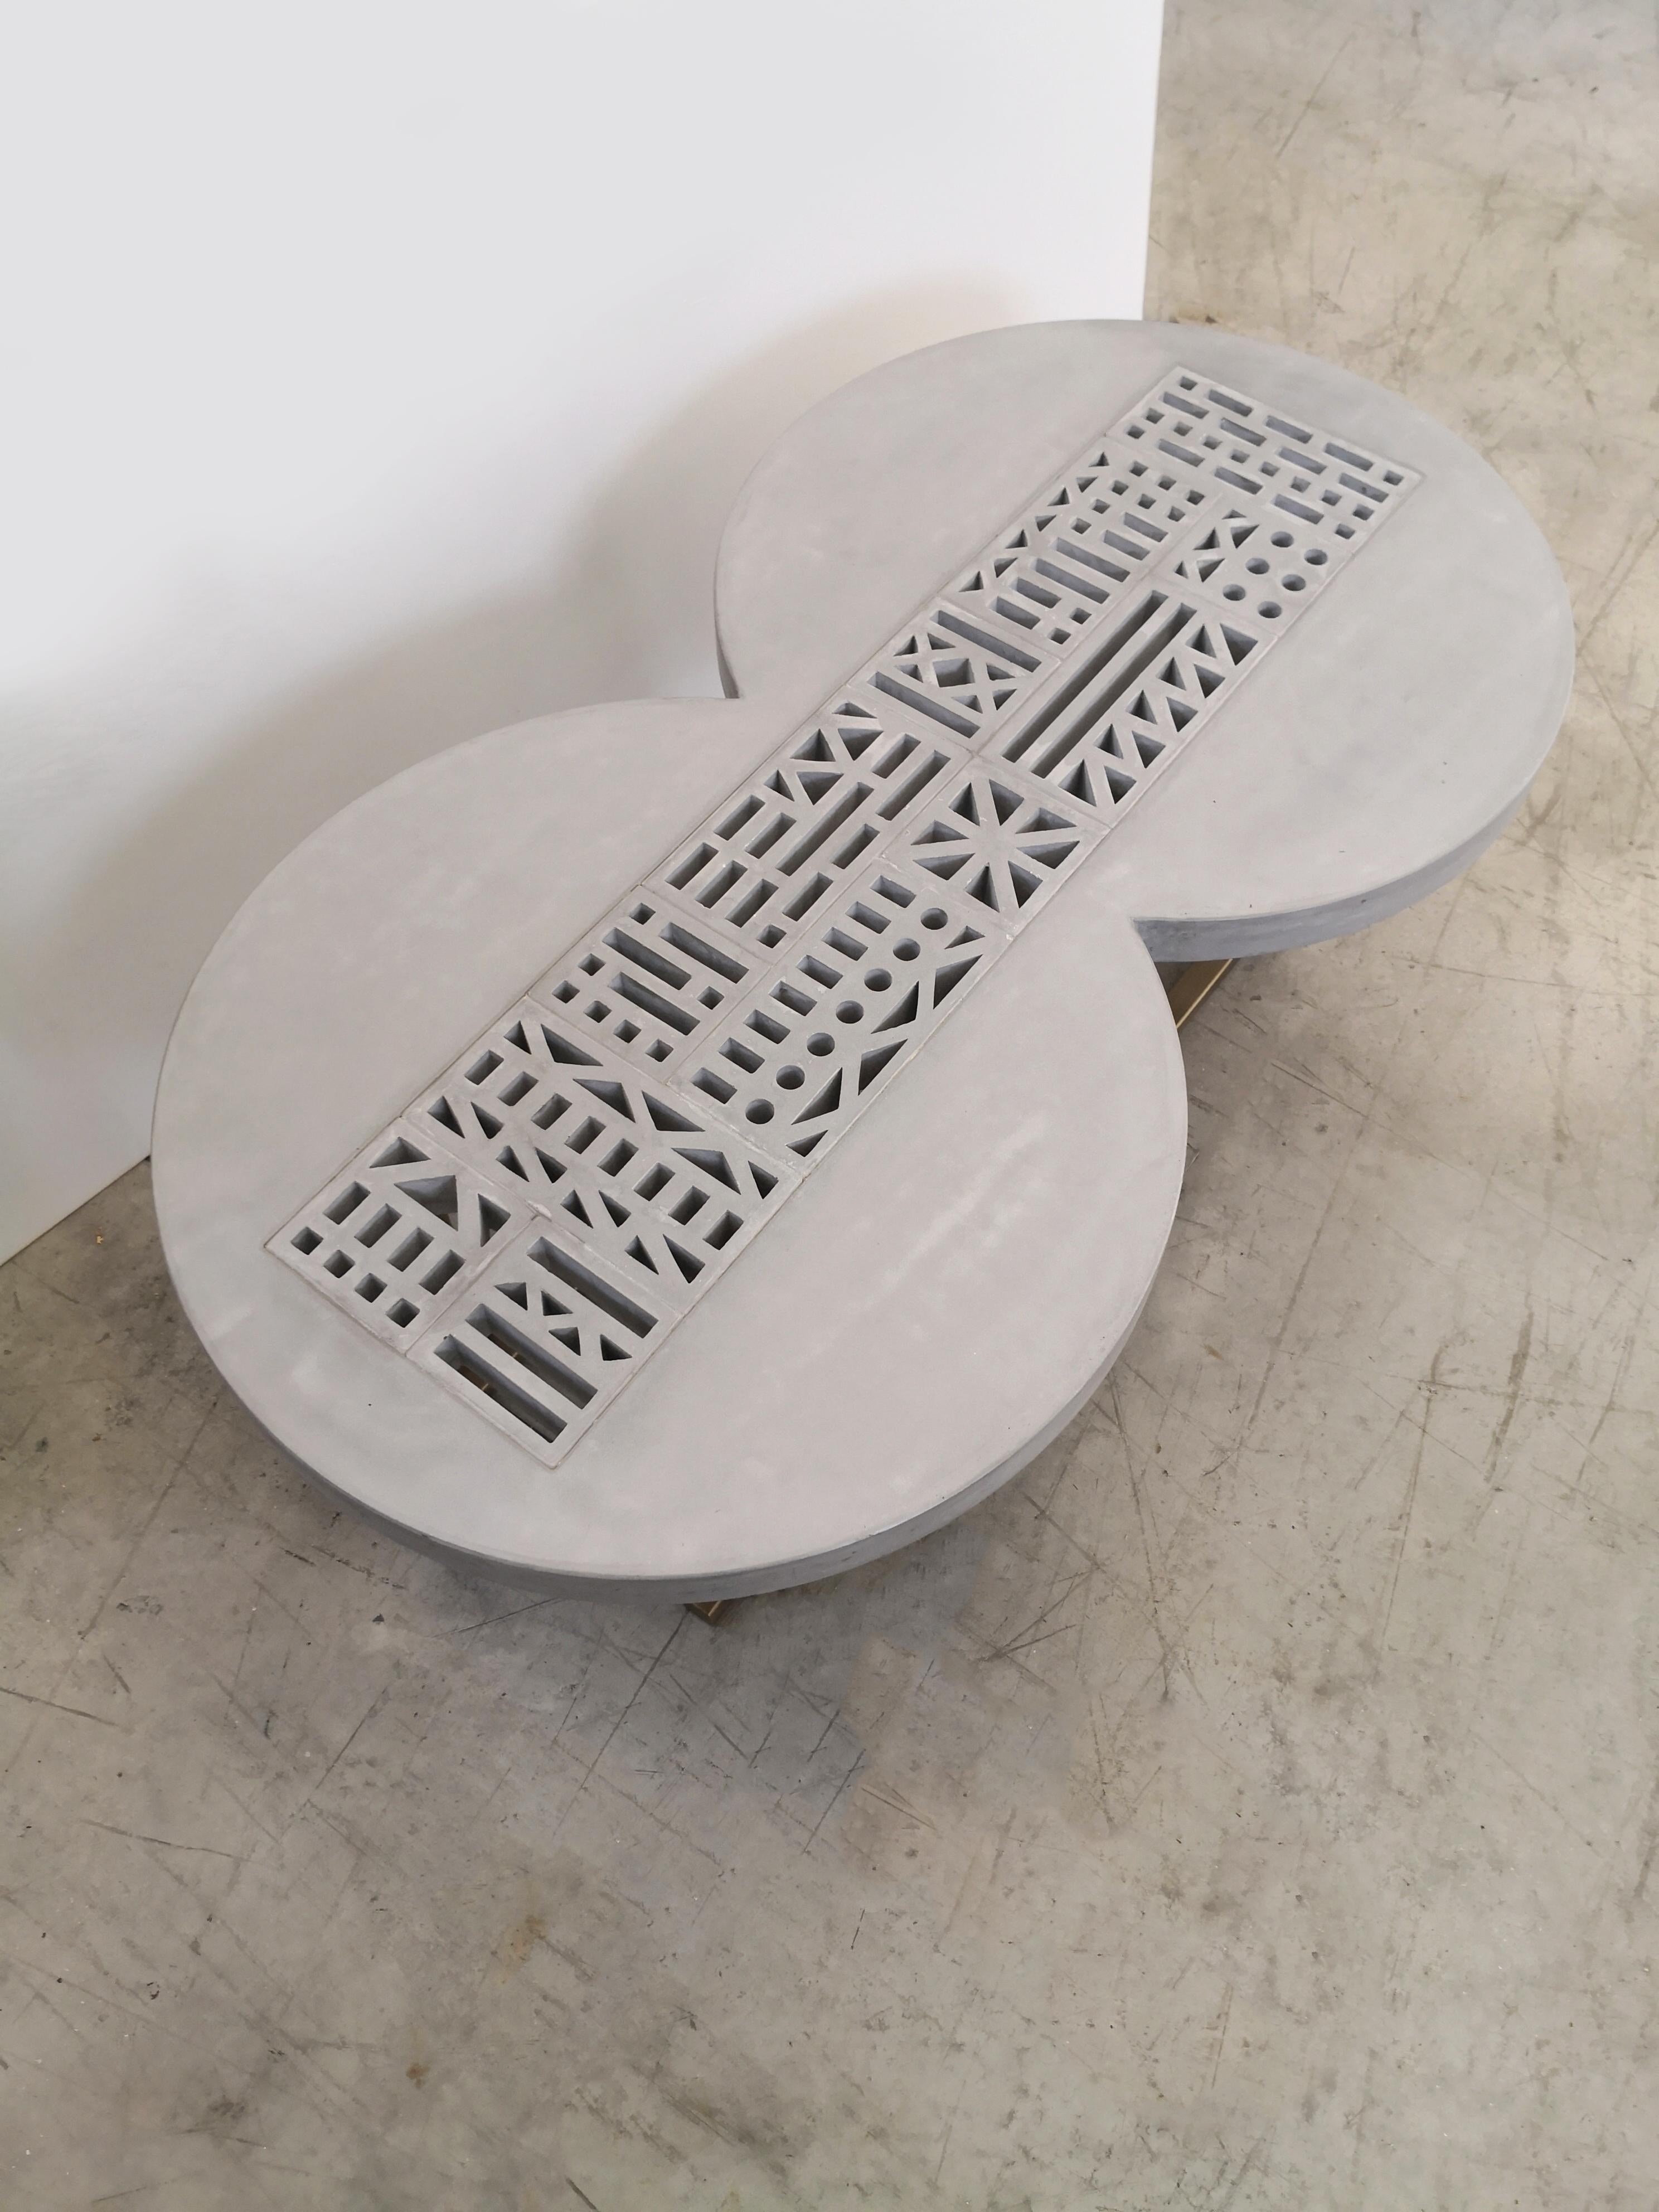 The “Doodling” collection is made of white Carrara marble, the most precious marble in the world, always sought after for its purity.
They are entirely made with a 5-axis numerical control cutter, a very sophisticated technology, the heritage of a